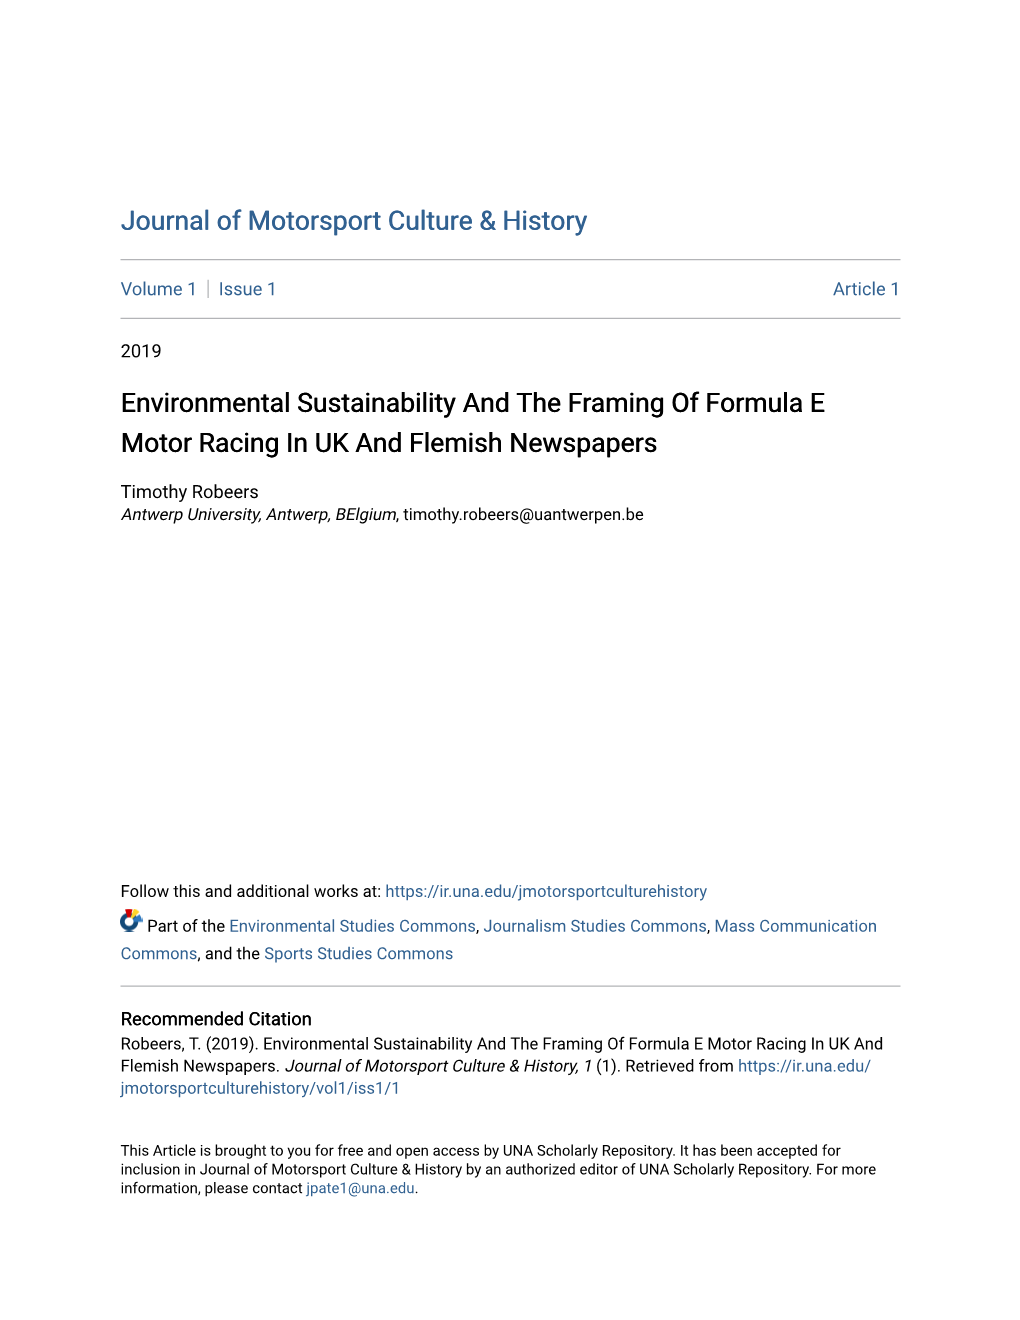 Environmental Sustainability and the Framing of Formula E Motor Racing in UK and Flemish Newspapers